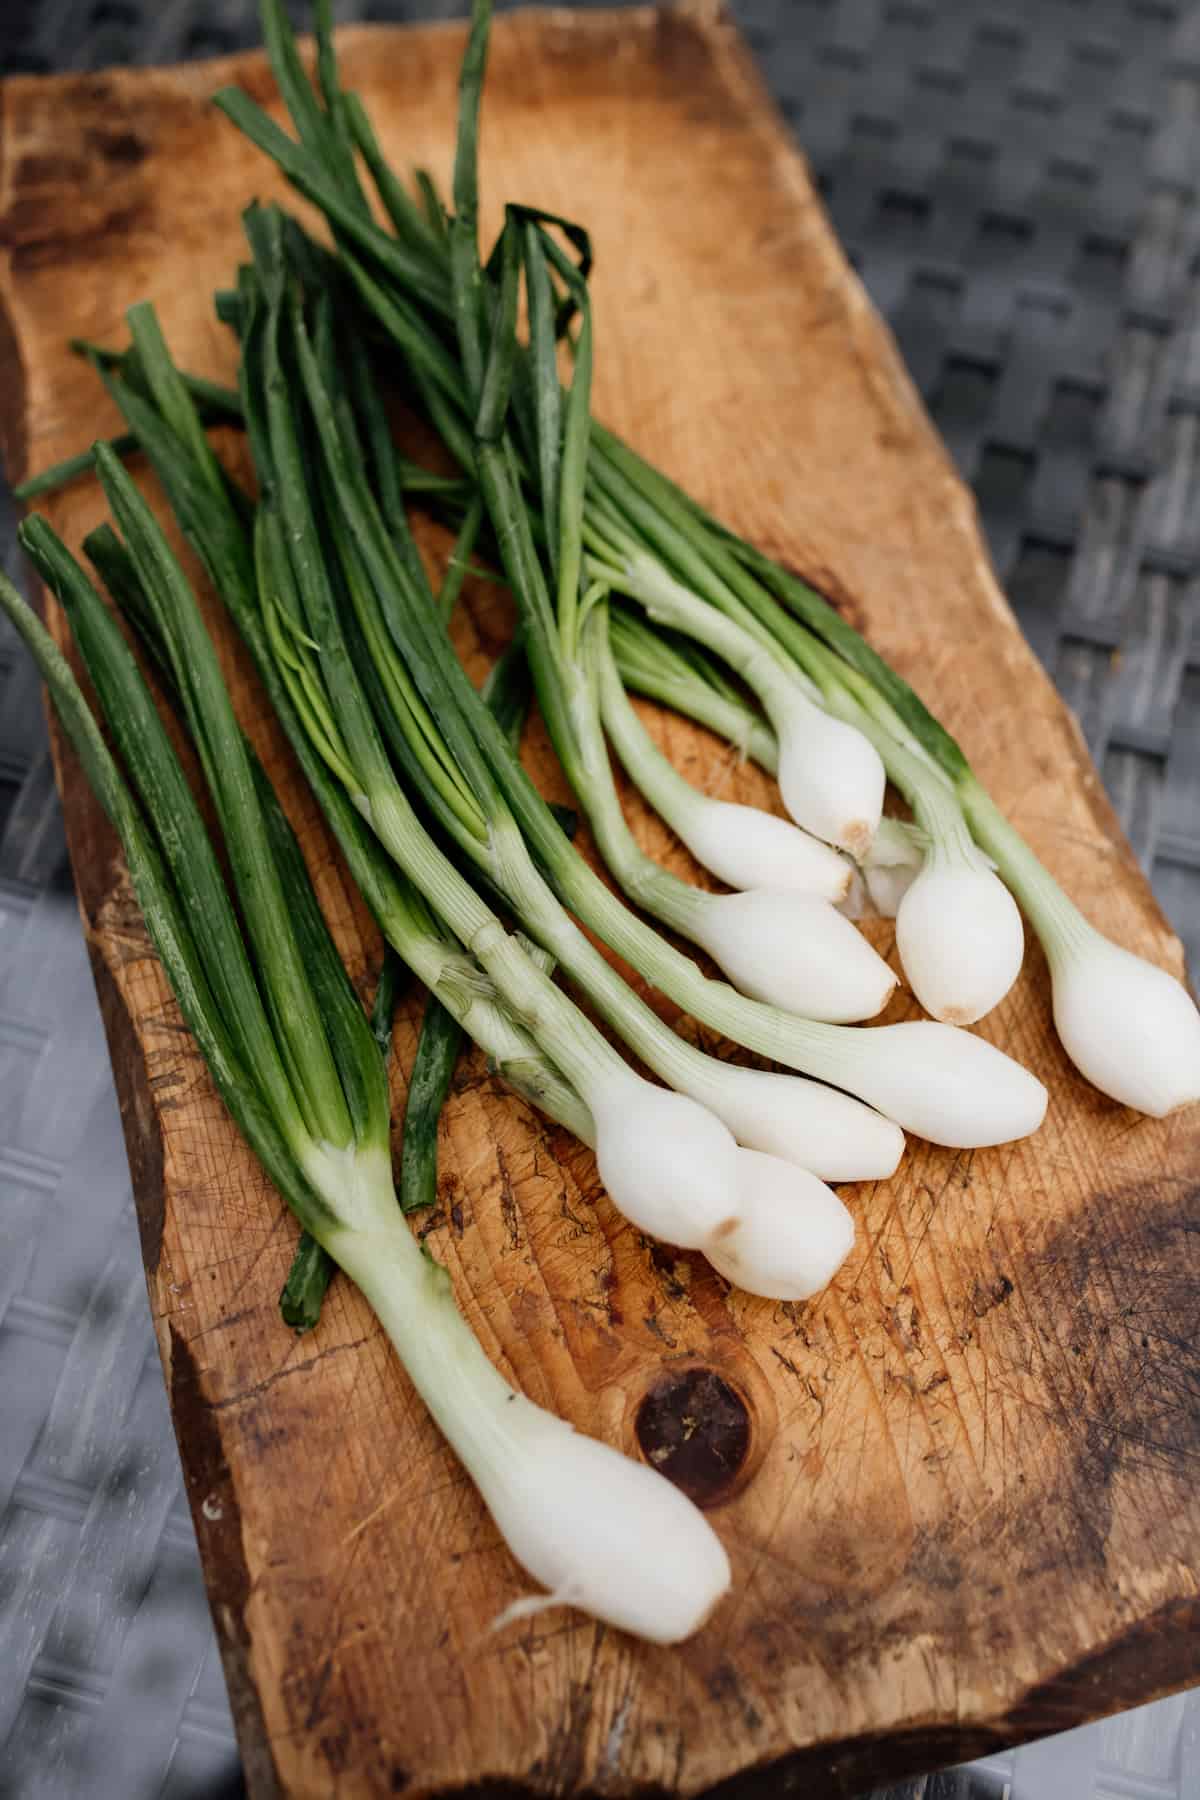 bunch of fresh spring onions on a wooden block